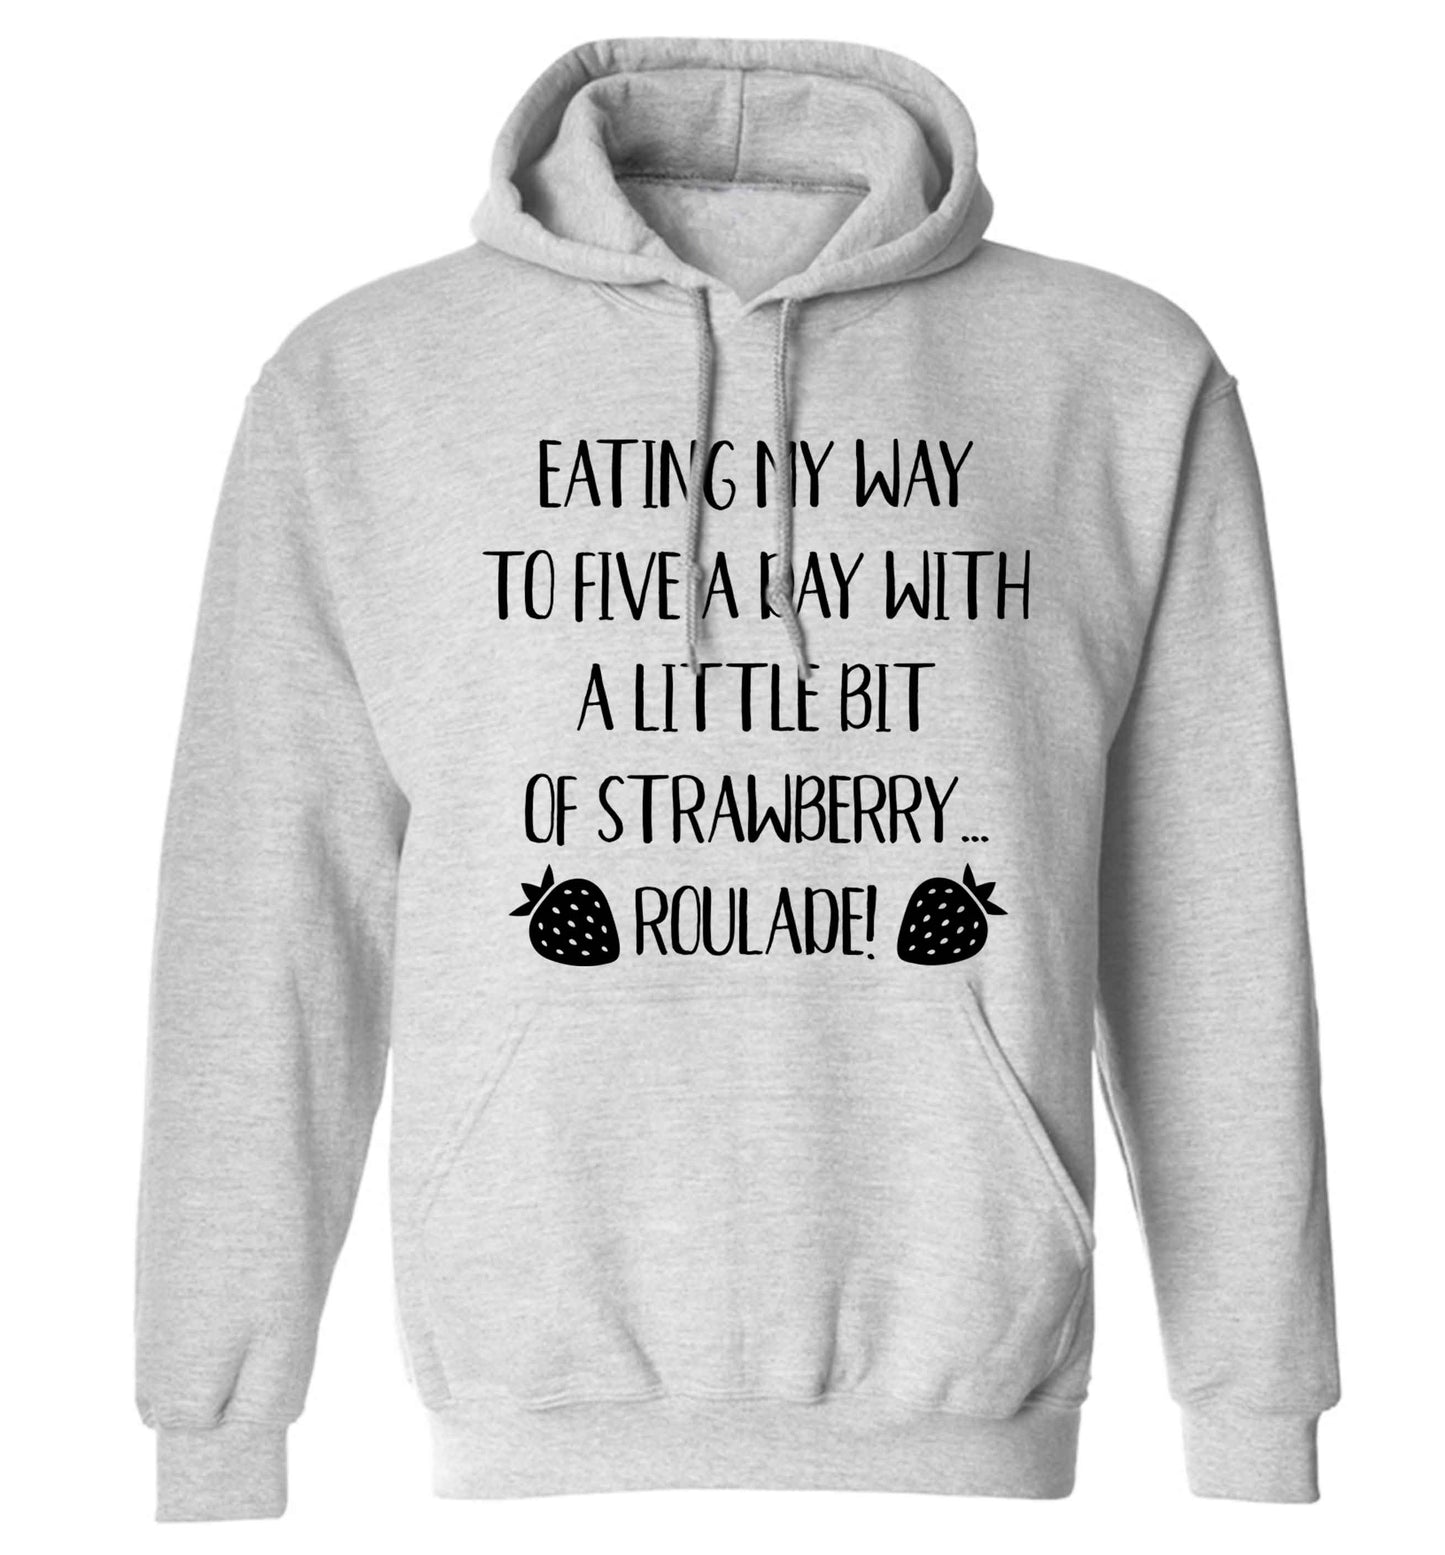 Eating my way to five a day with a little bit of strawberry roulade adults unisex grey hoodie 2XL